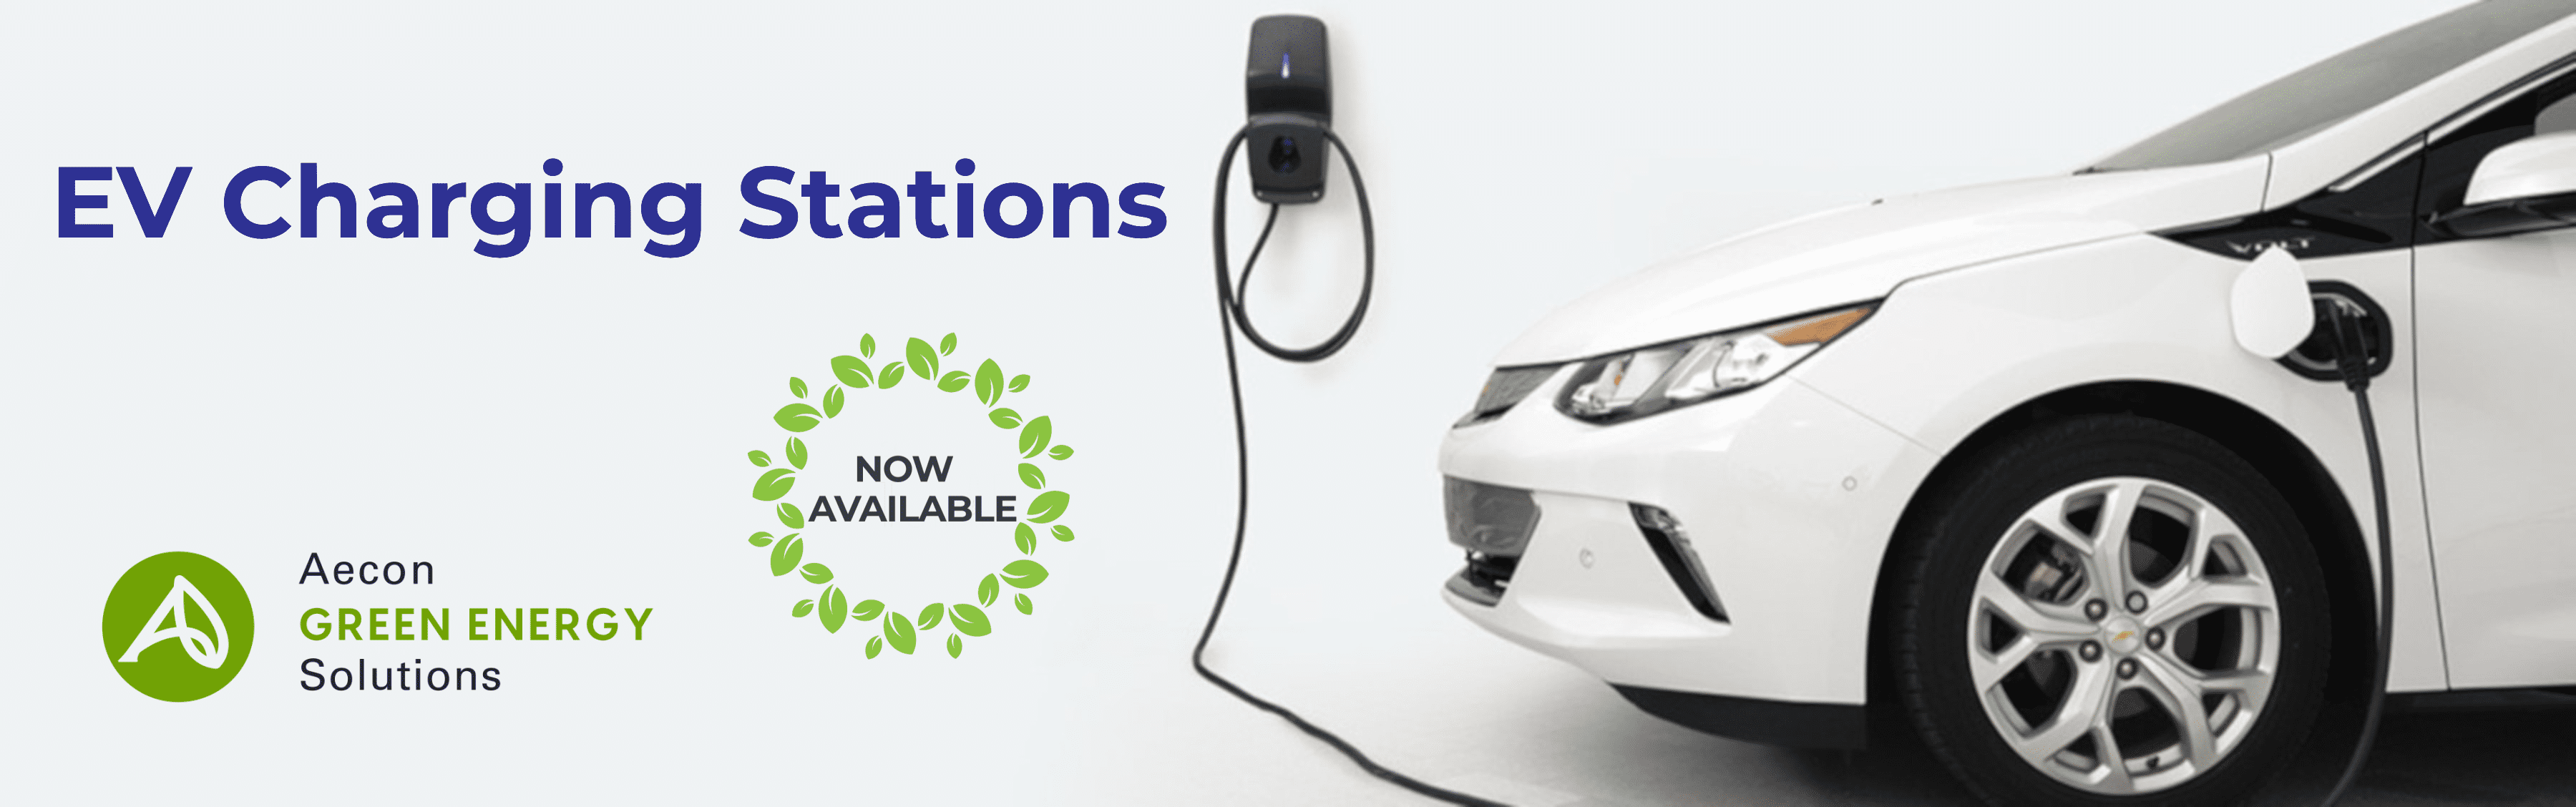 EV Charging Stations - Now Available